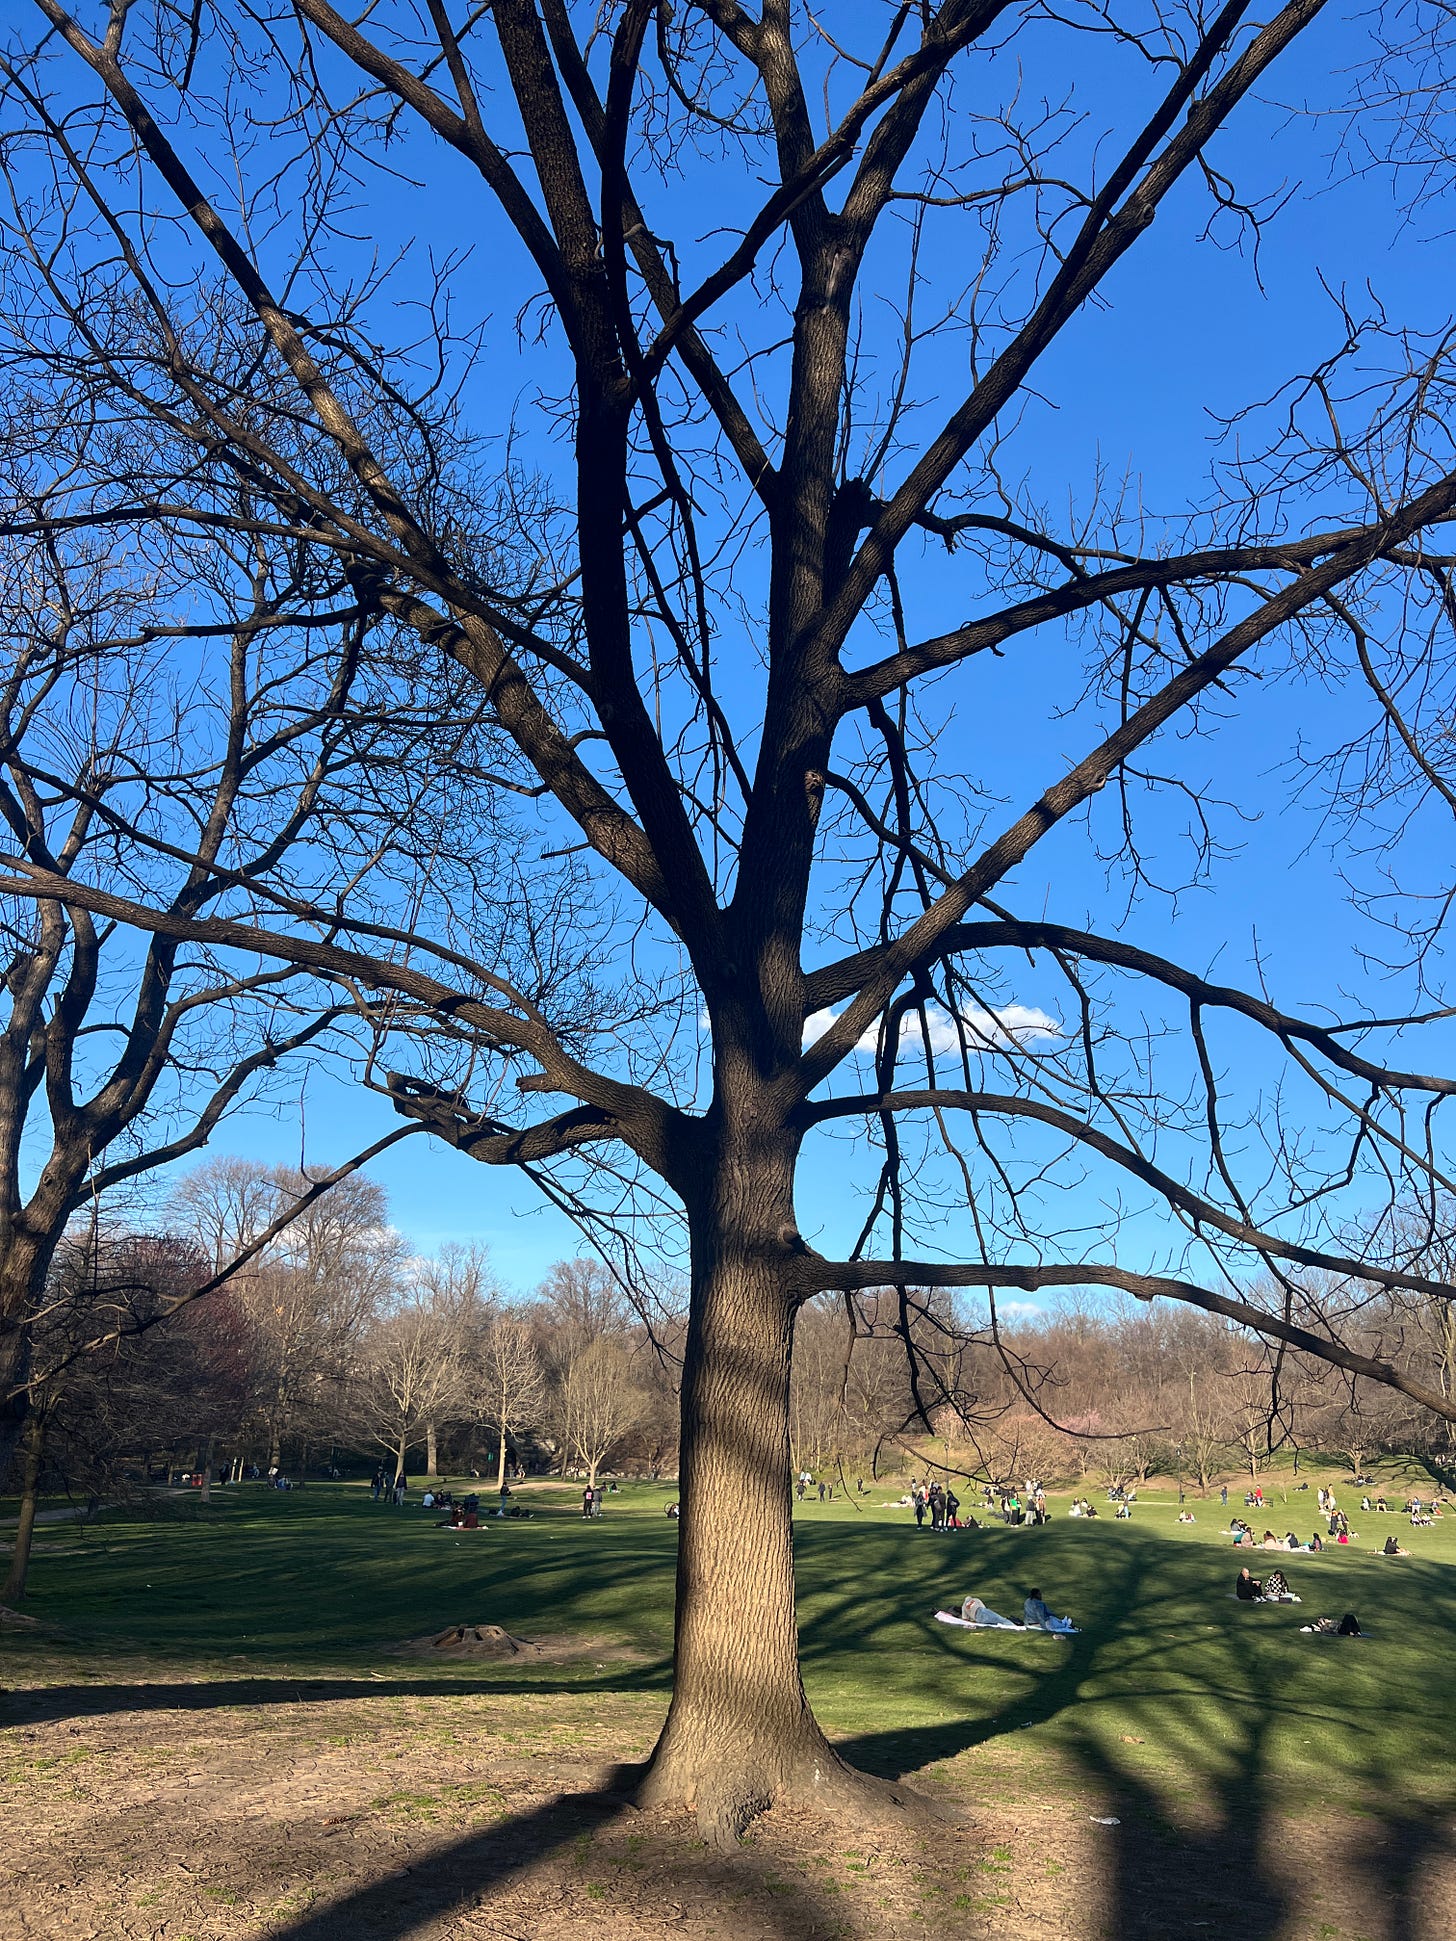 A leafless tree at the park late winter